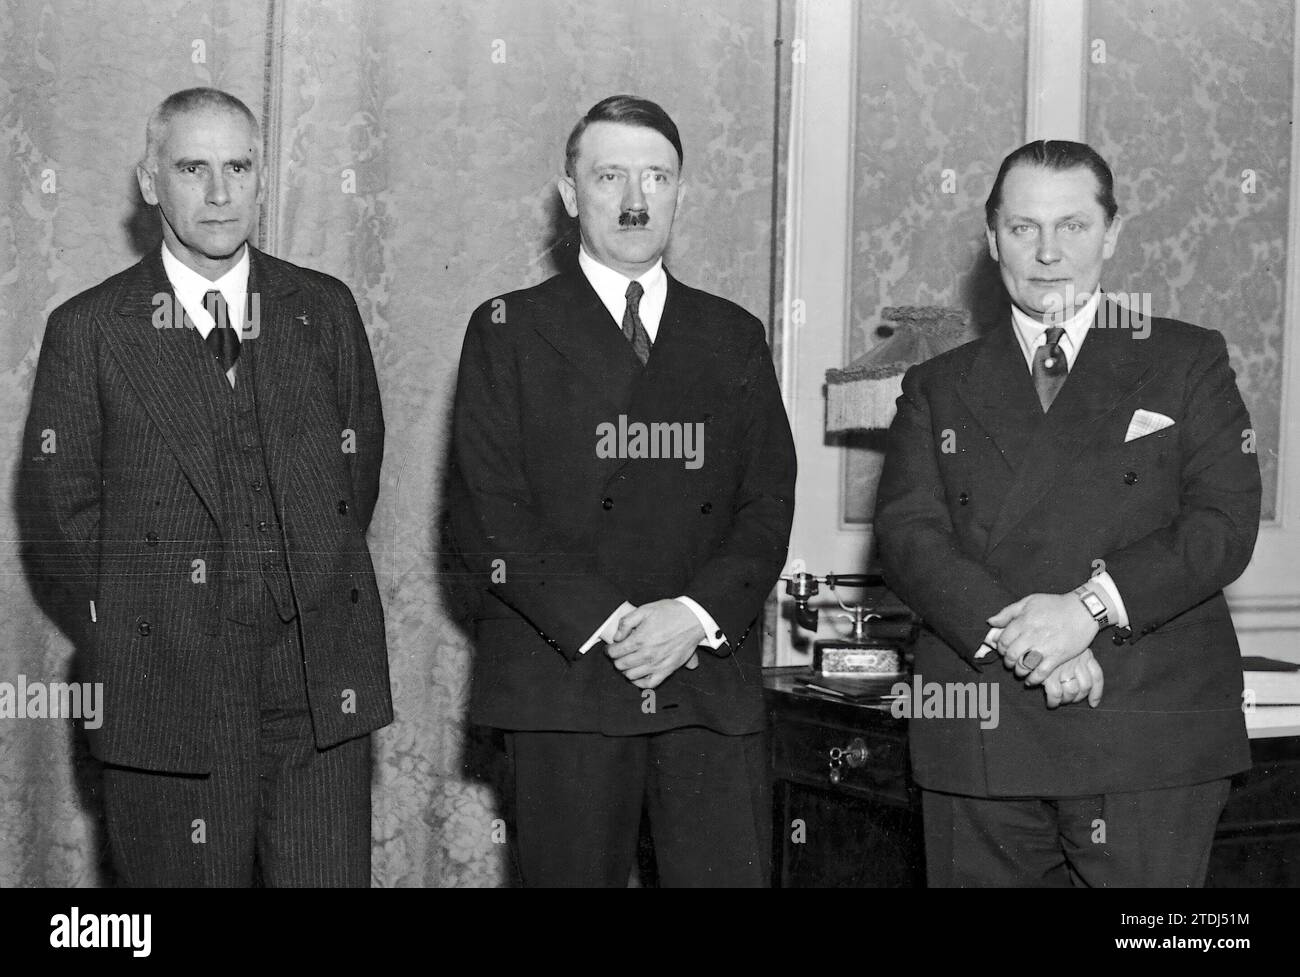 Berlin. 01/30/1933. Reich Chancellor Adolf Hitler poses with his ministers Göring and Frizk. Credit: Album / Archivo ABC / Heinrich Hoffmann Stock Photo